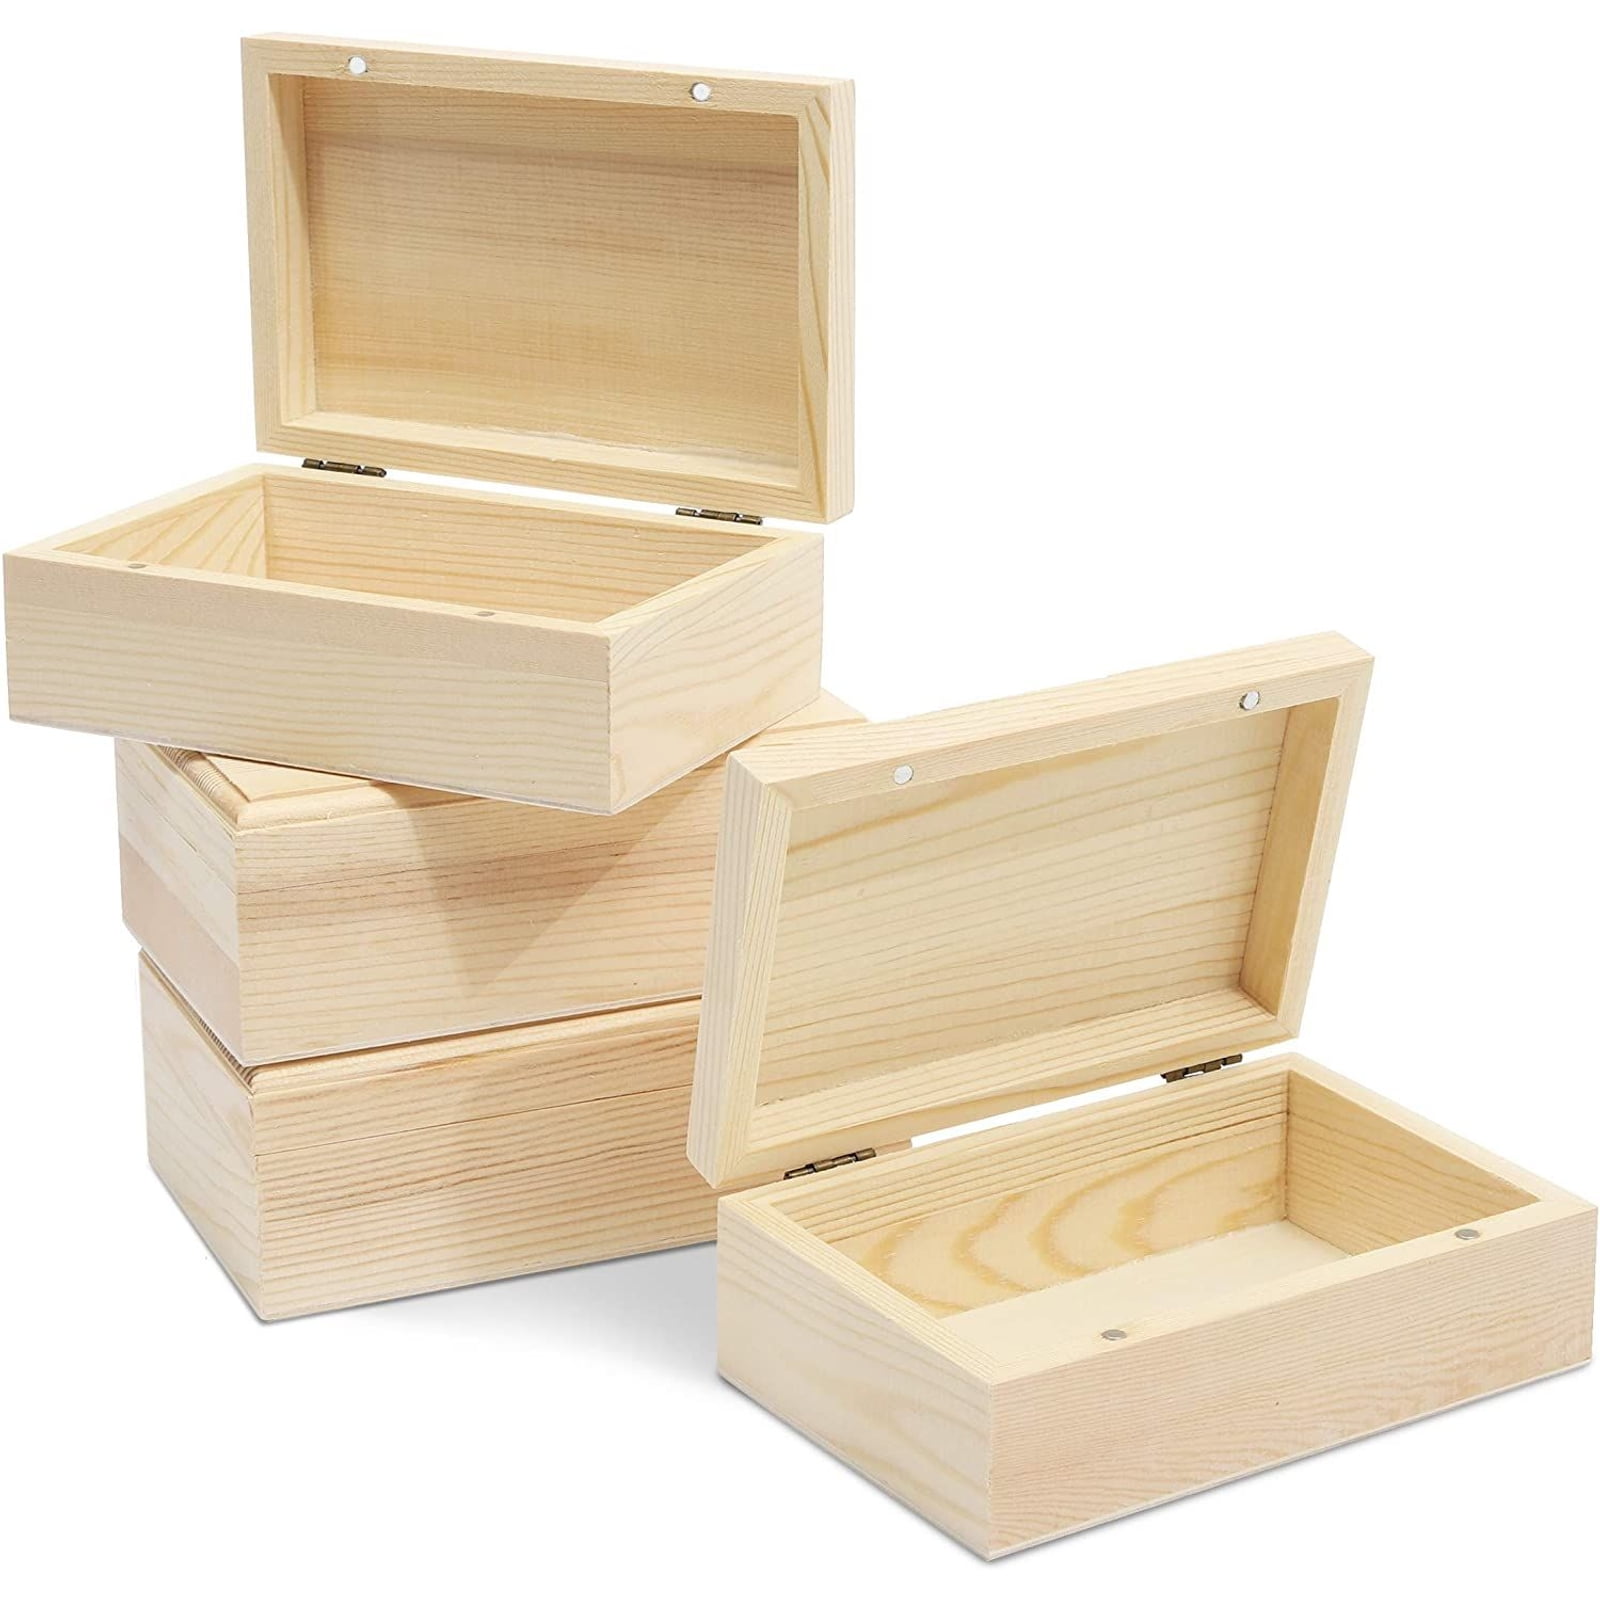 1pcs Unfinished Unpainted Hinged Wooden Natural Wood Box with Lid Lockable 